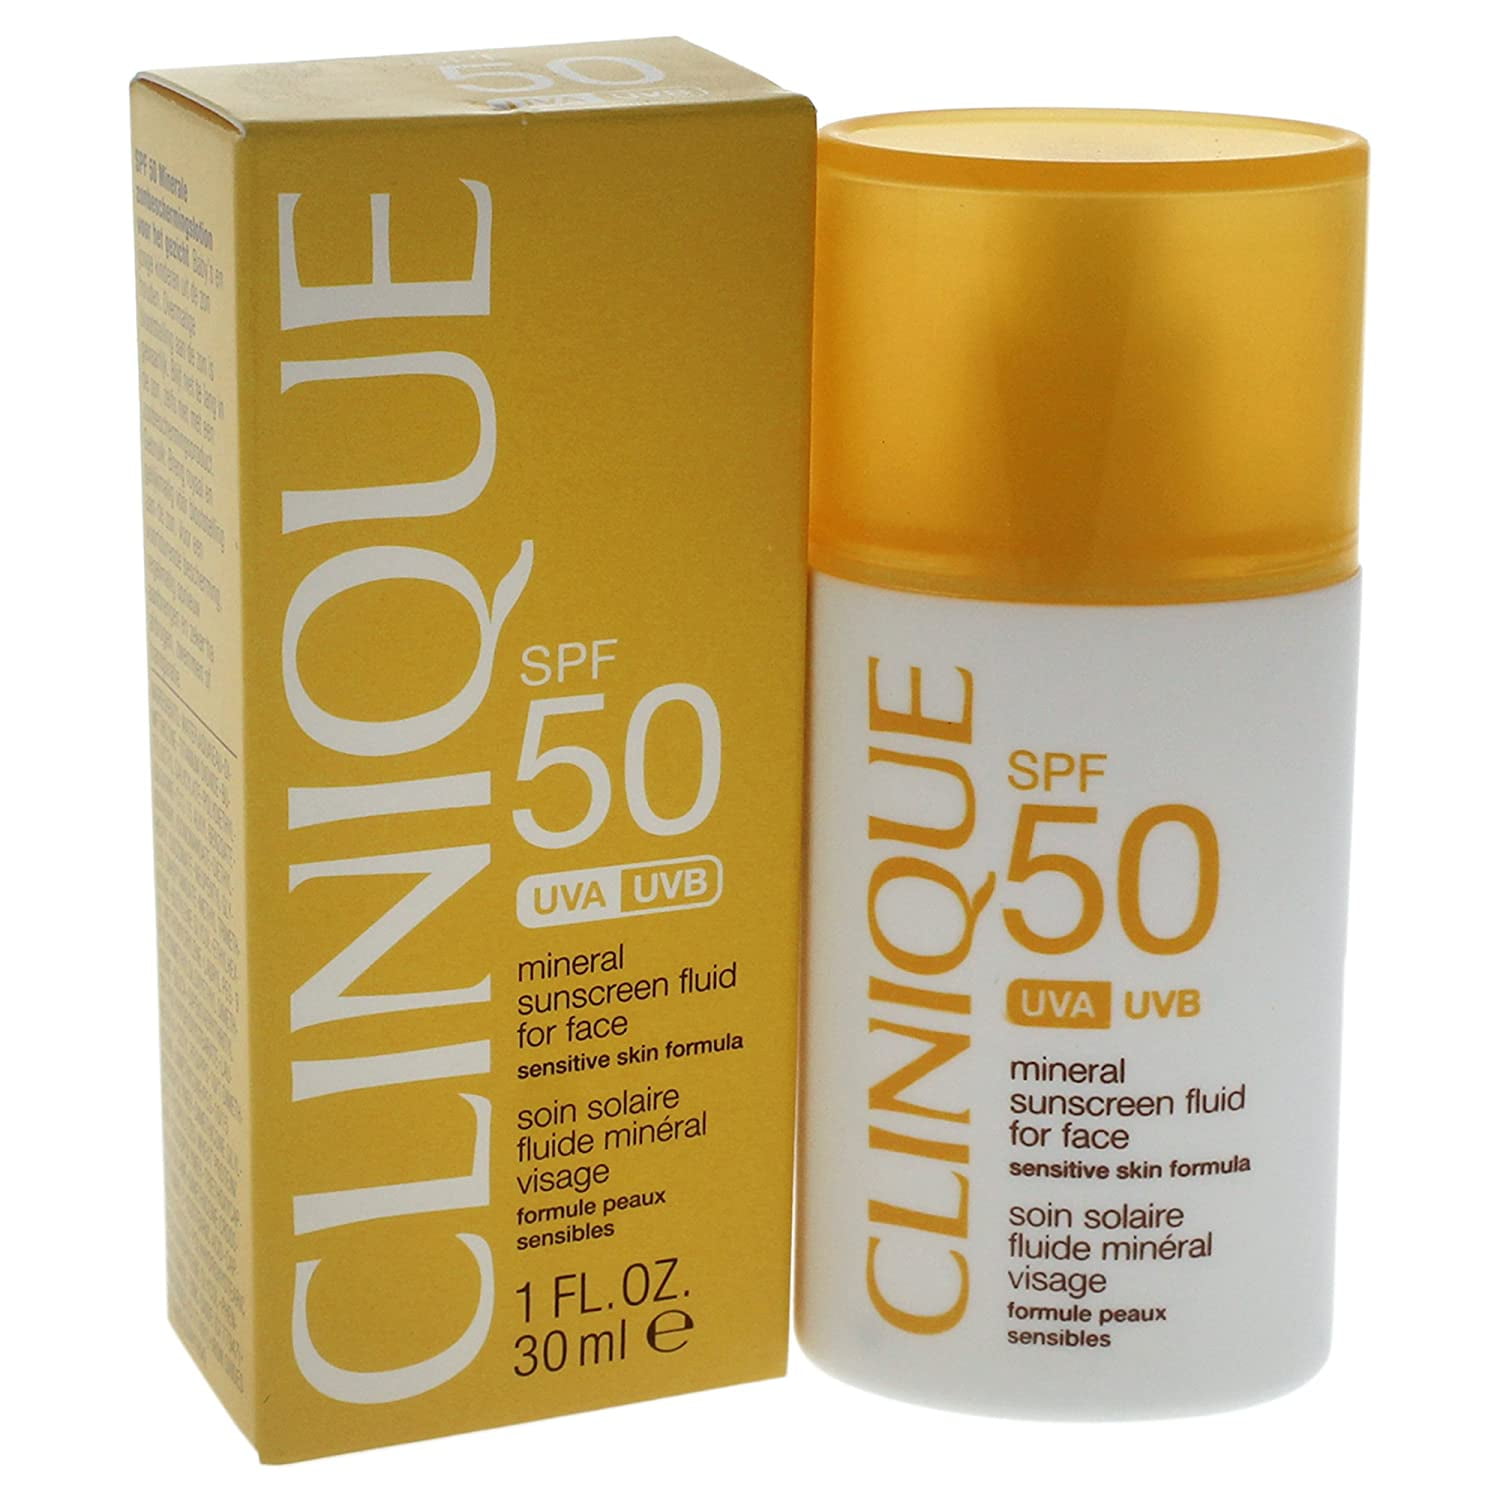 Clinique Mineral Sunscreen Fluid for face SPF 50. Clinique broad Spectrum SPF 50 Sunscreen face. Американский СПФ 50 +. Clinique Mineral Sunscreen.